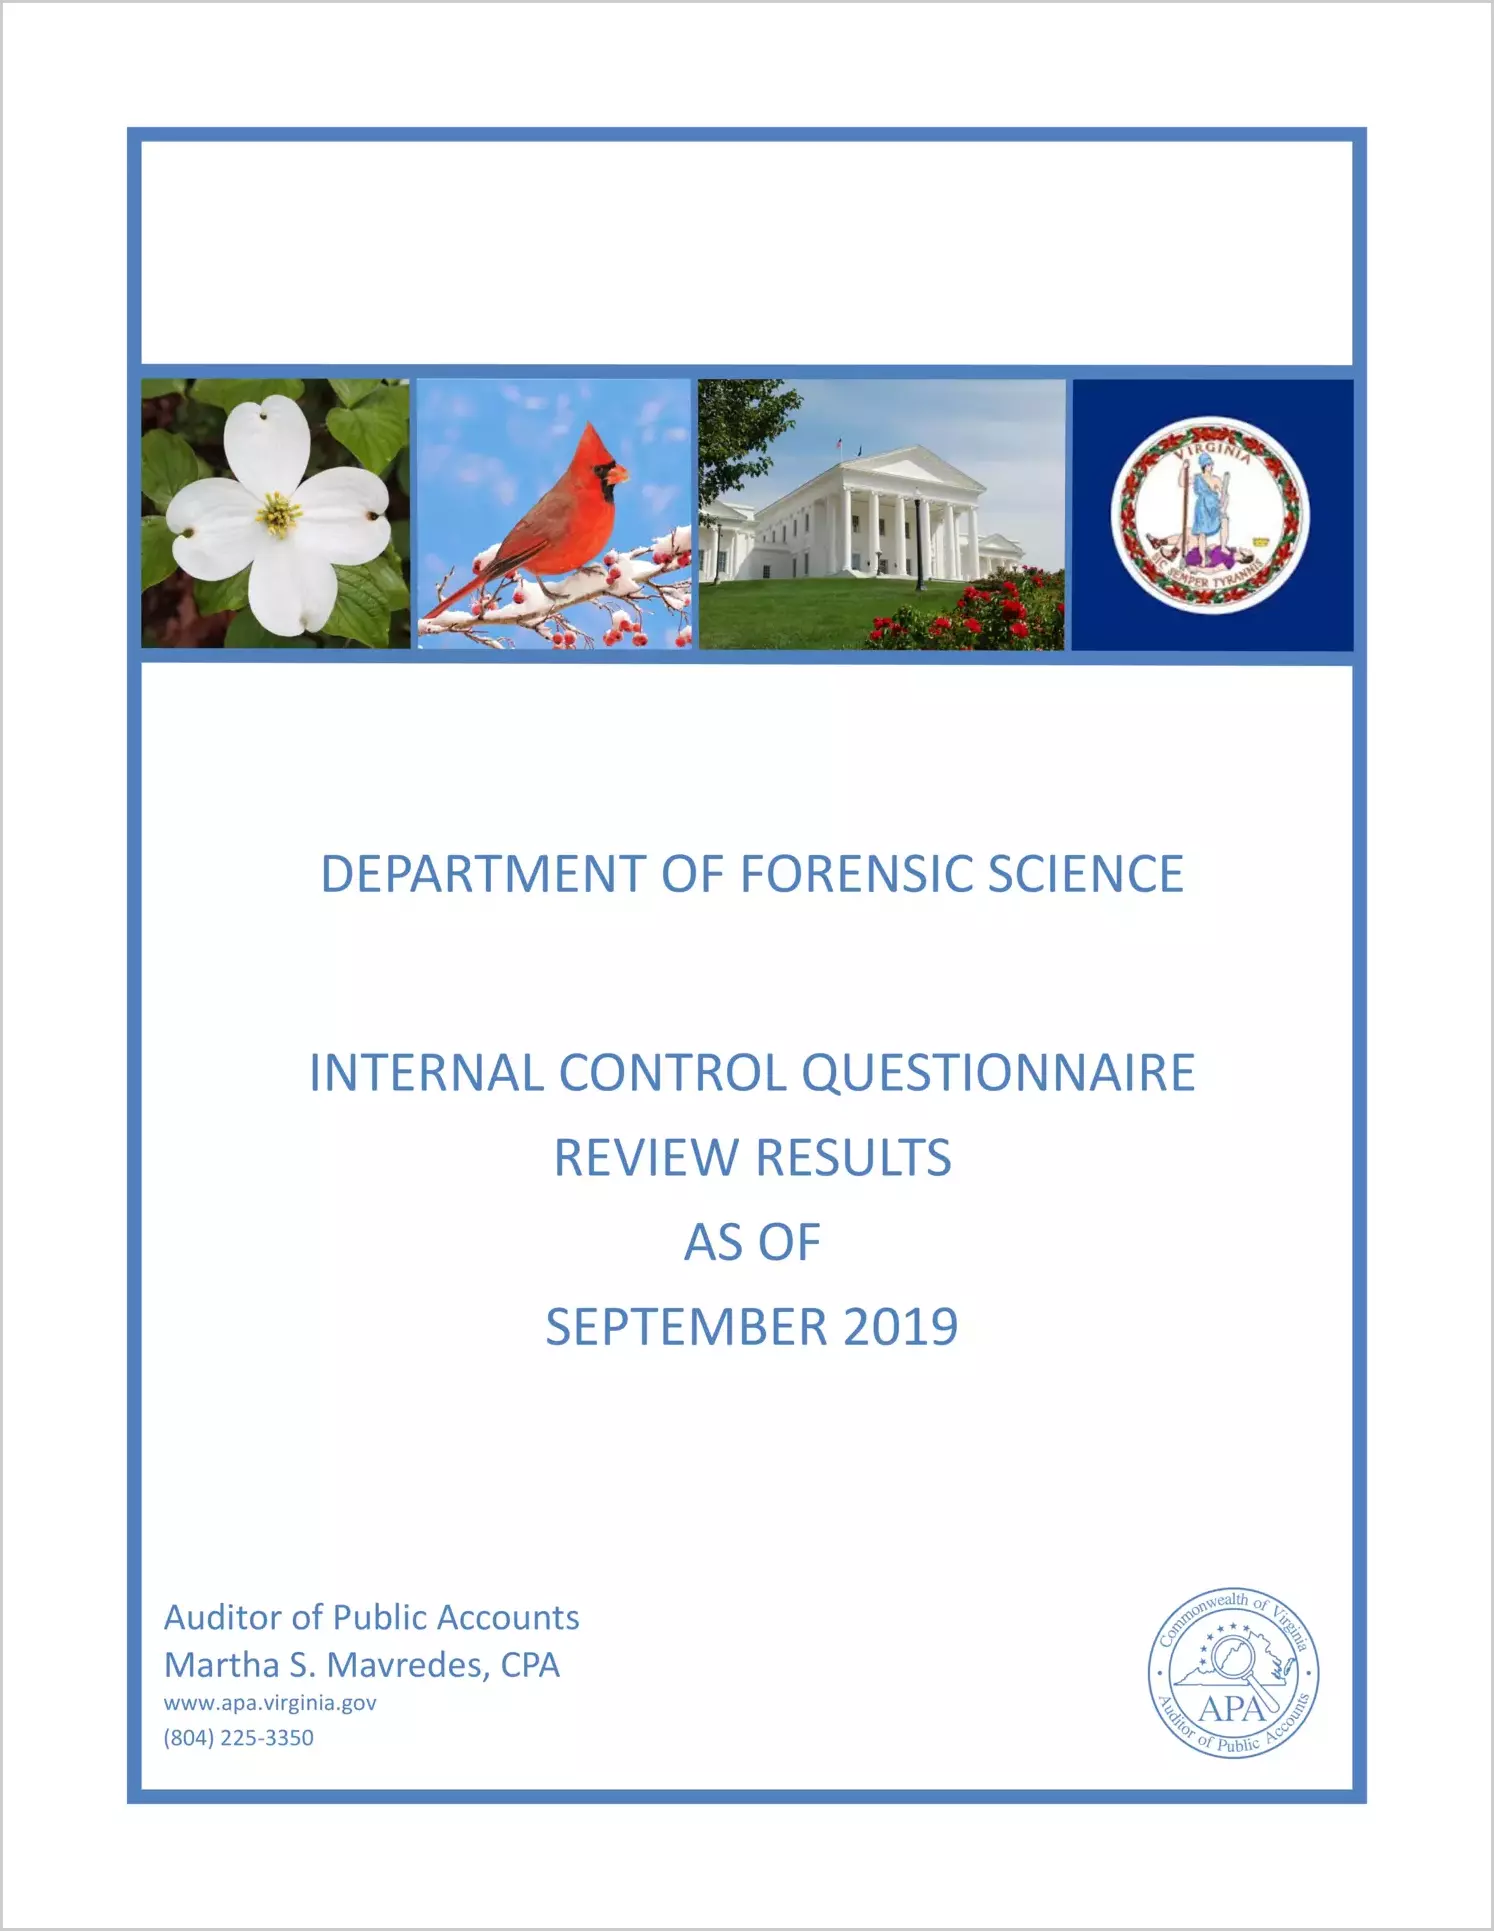 Department of Forensic Science Internal Control Questionnaire Review Results as of September 2019